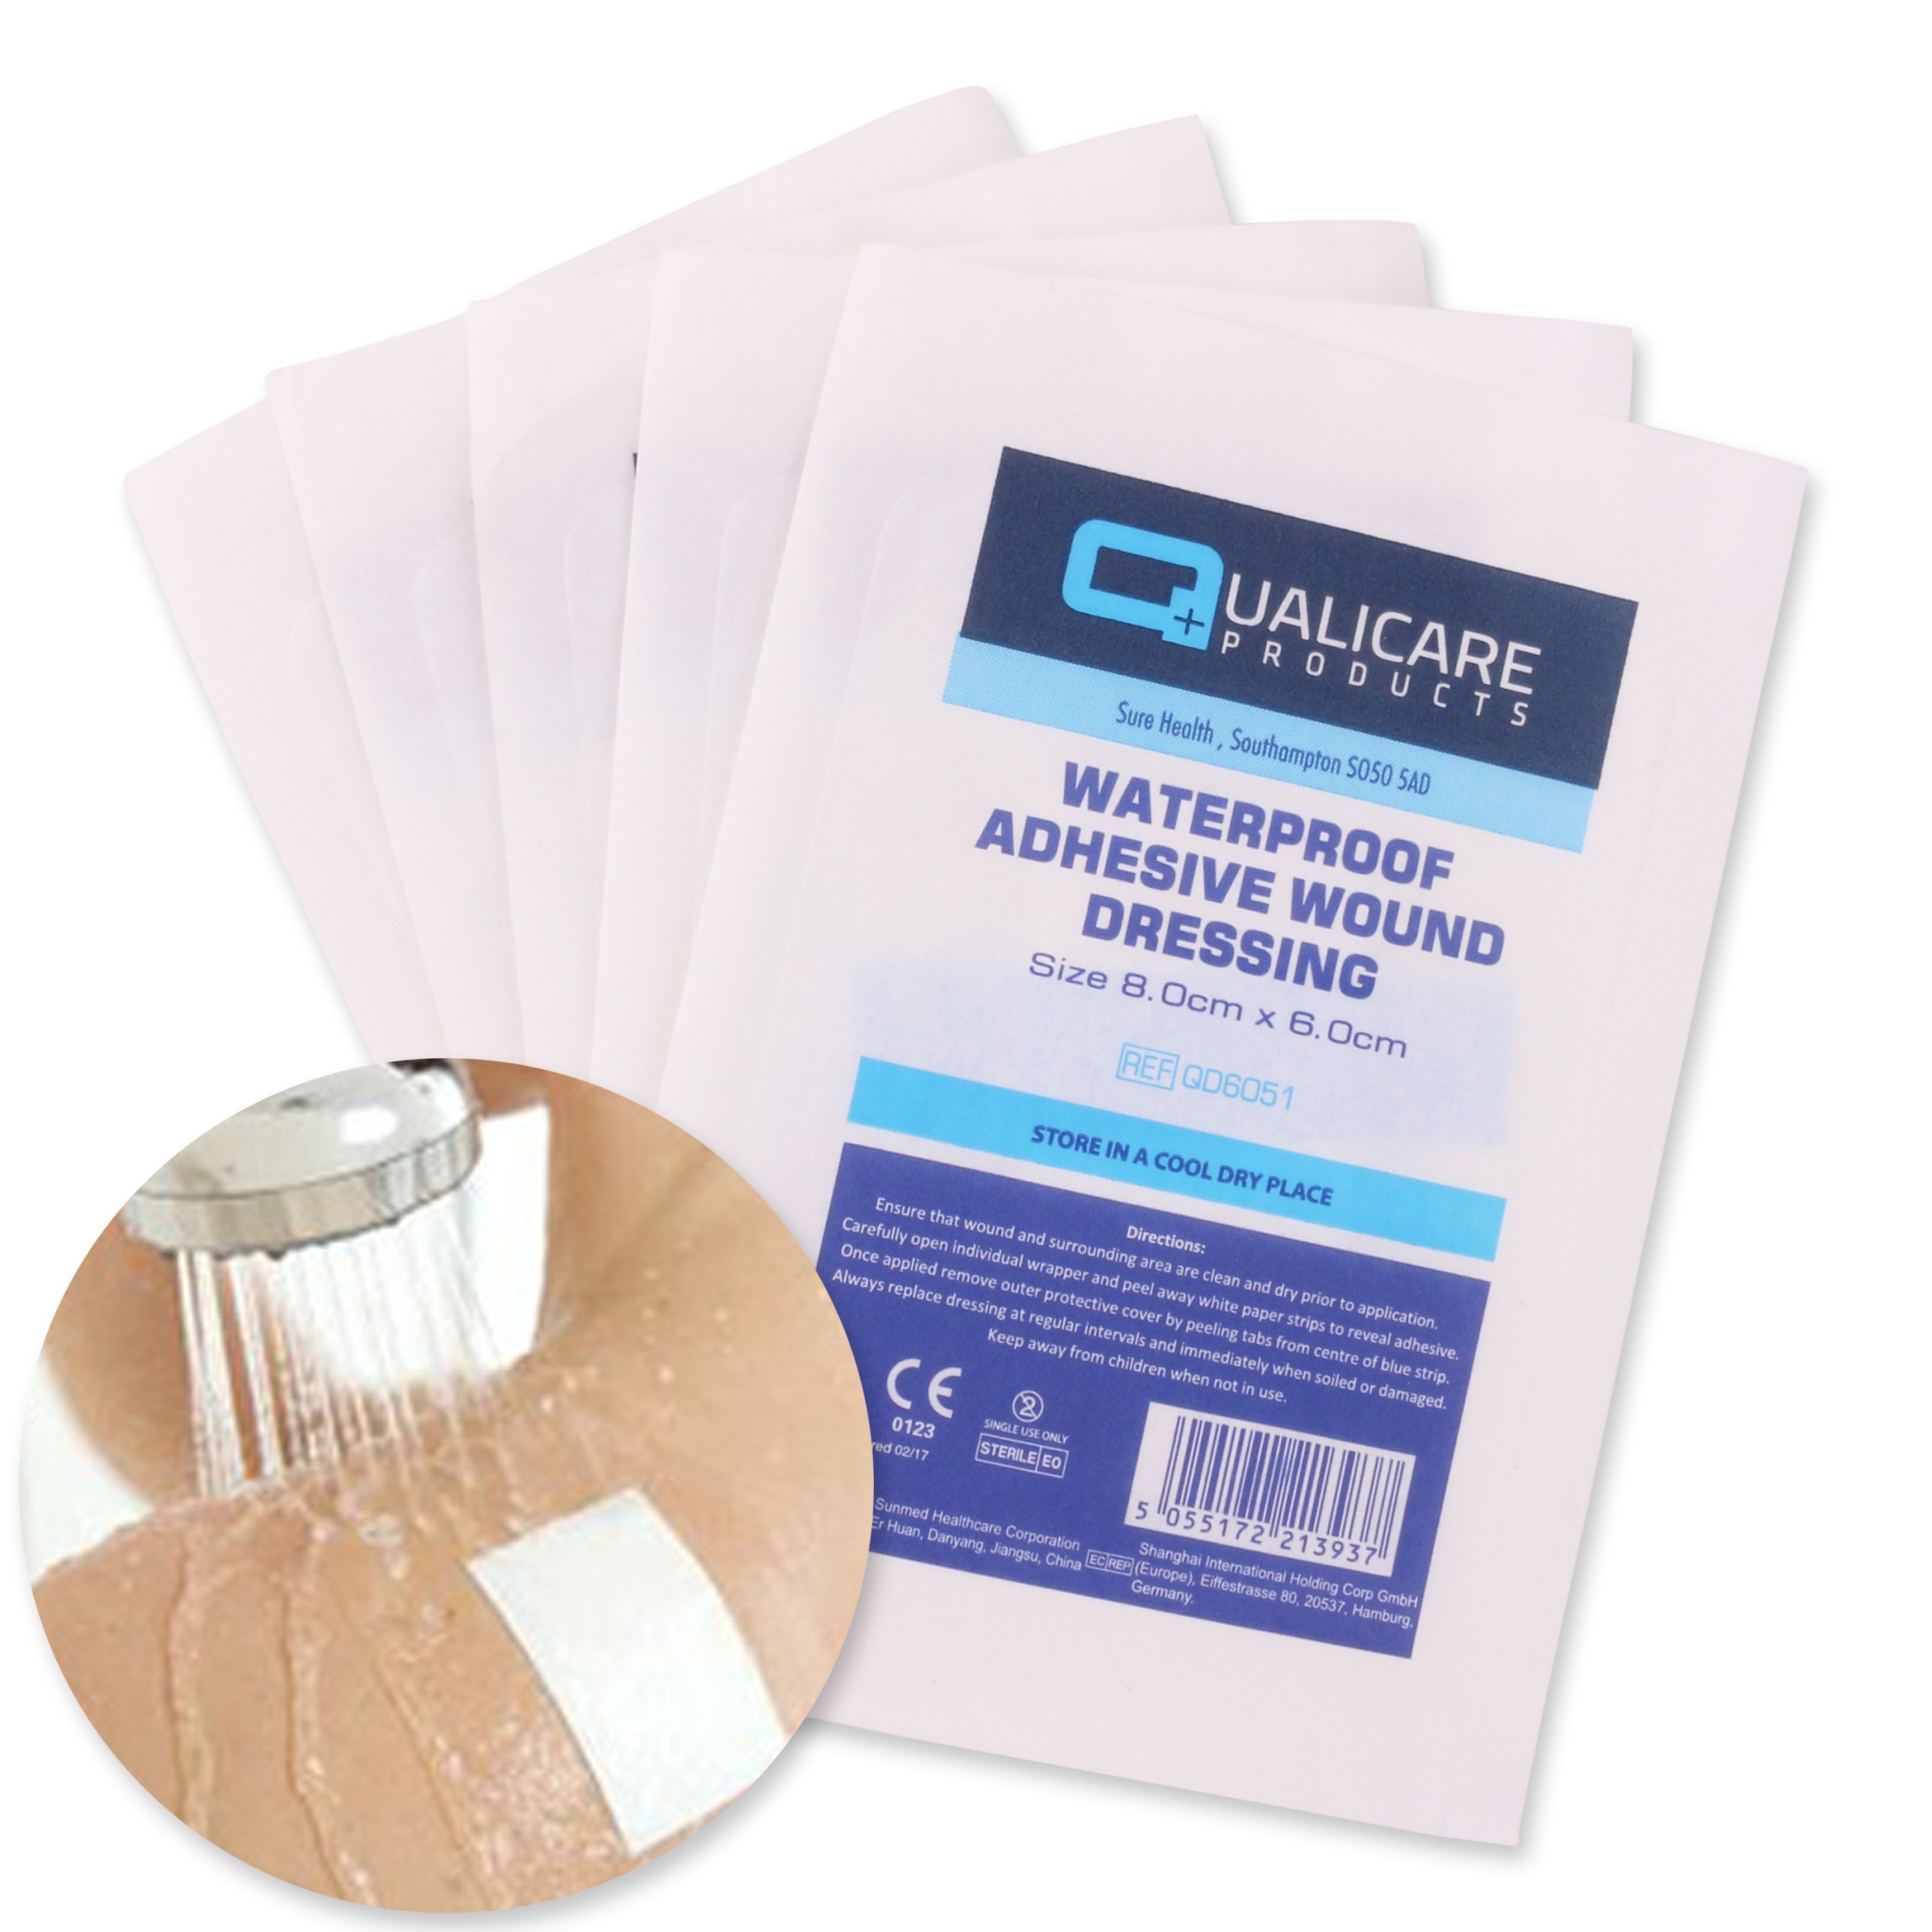 MedVance Silicone Bordered Adhesive Wound Dressing, 4